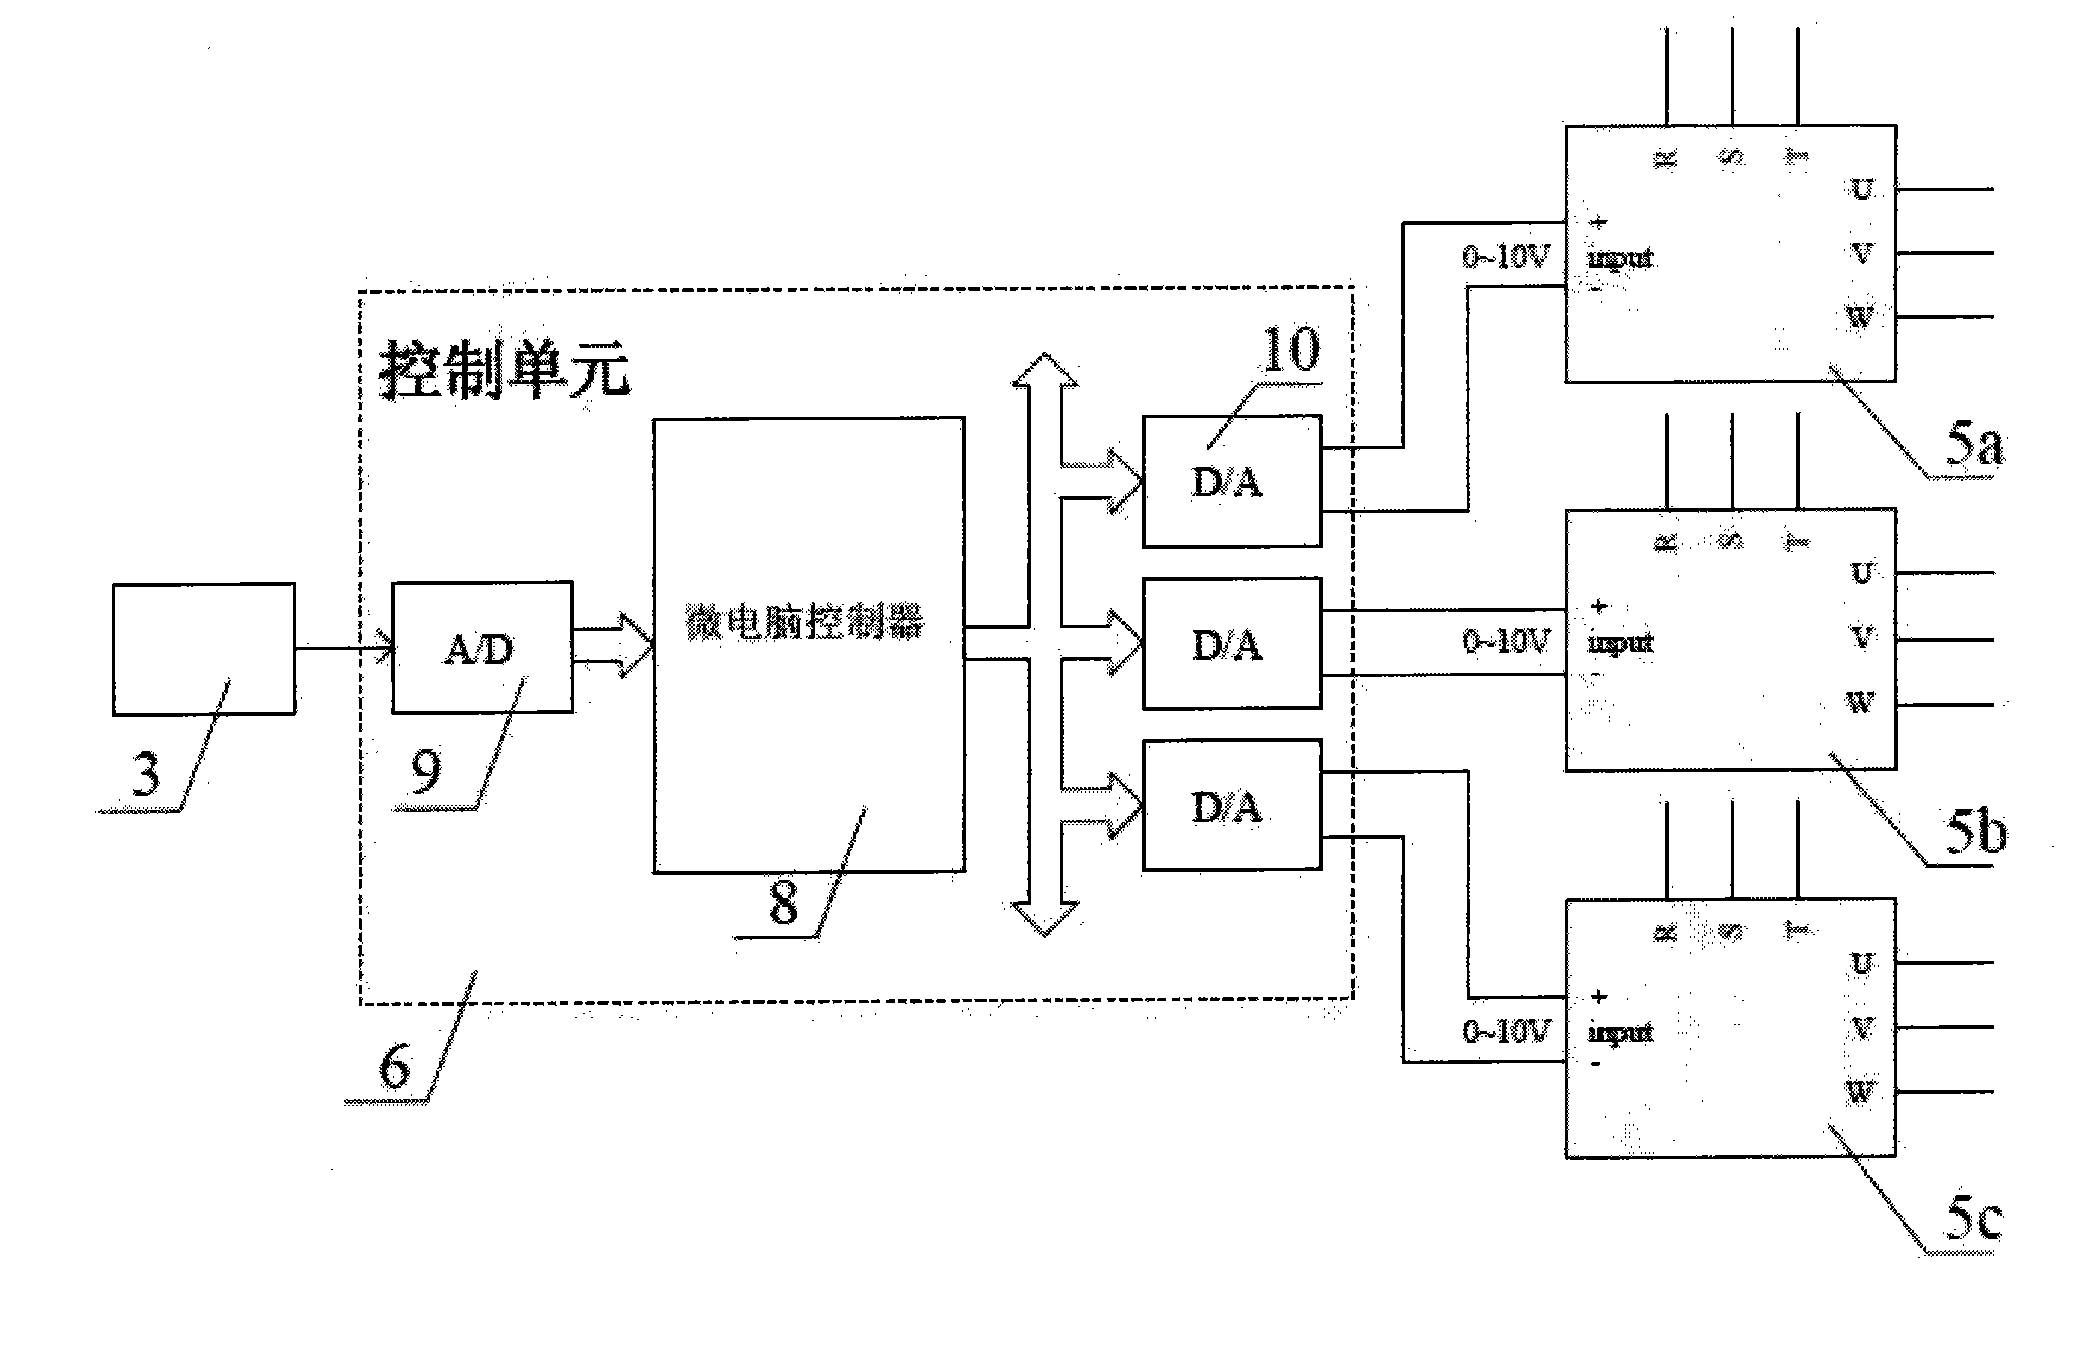 Control system of one-frequency one-pump constant pressure water supply equipment